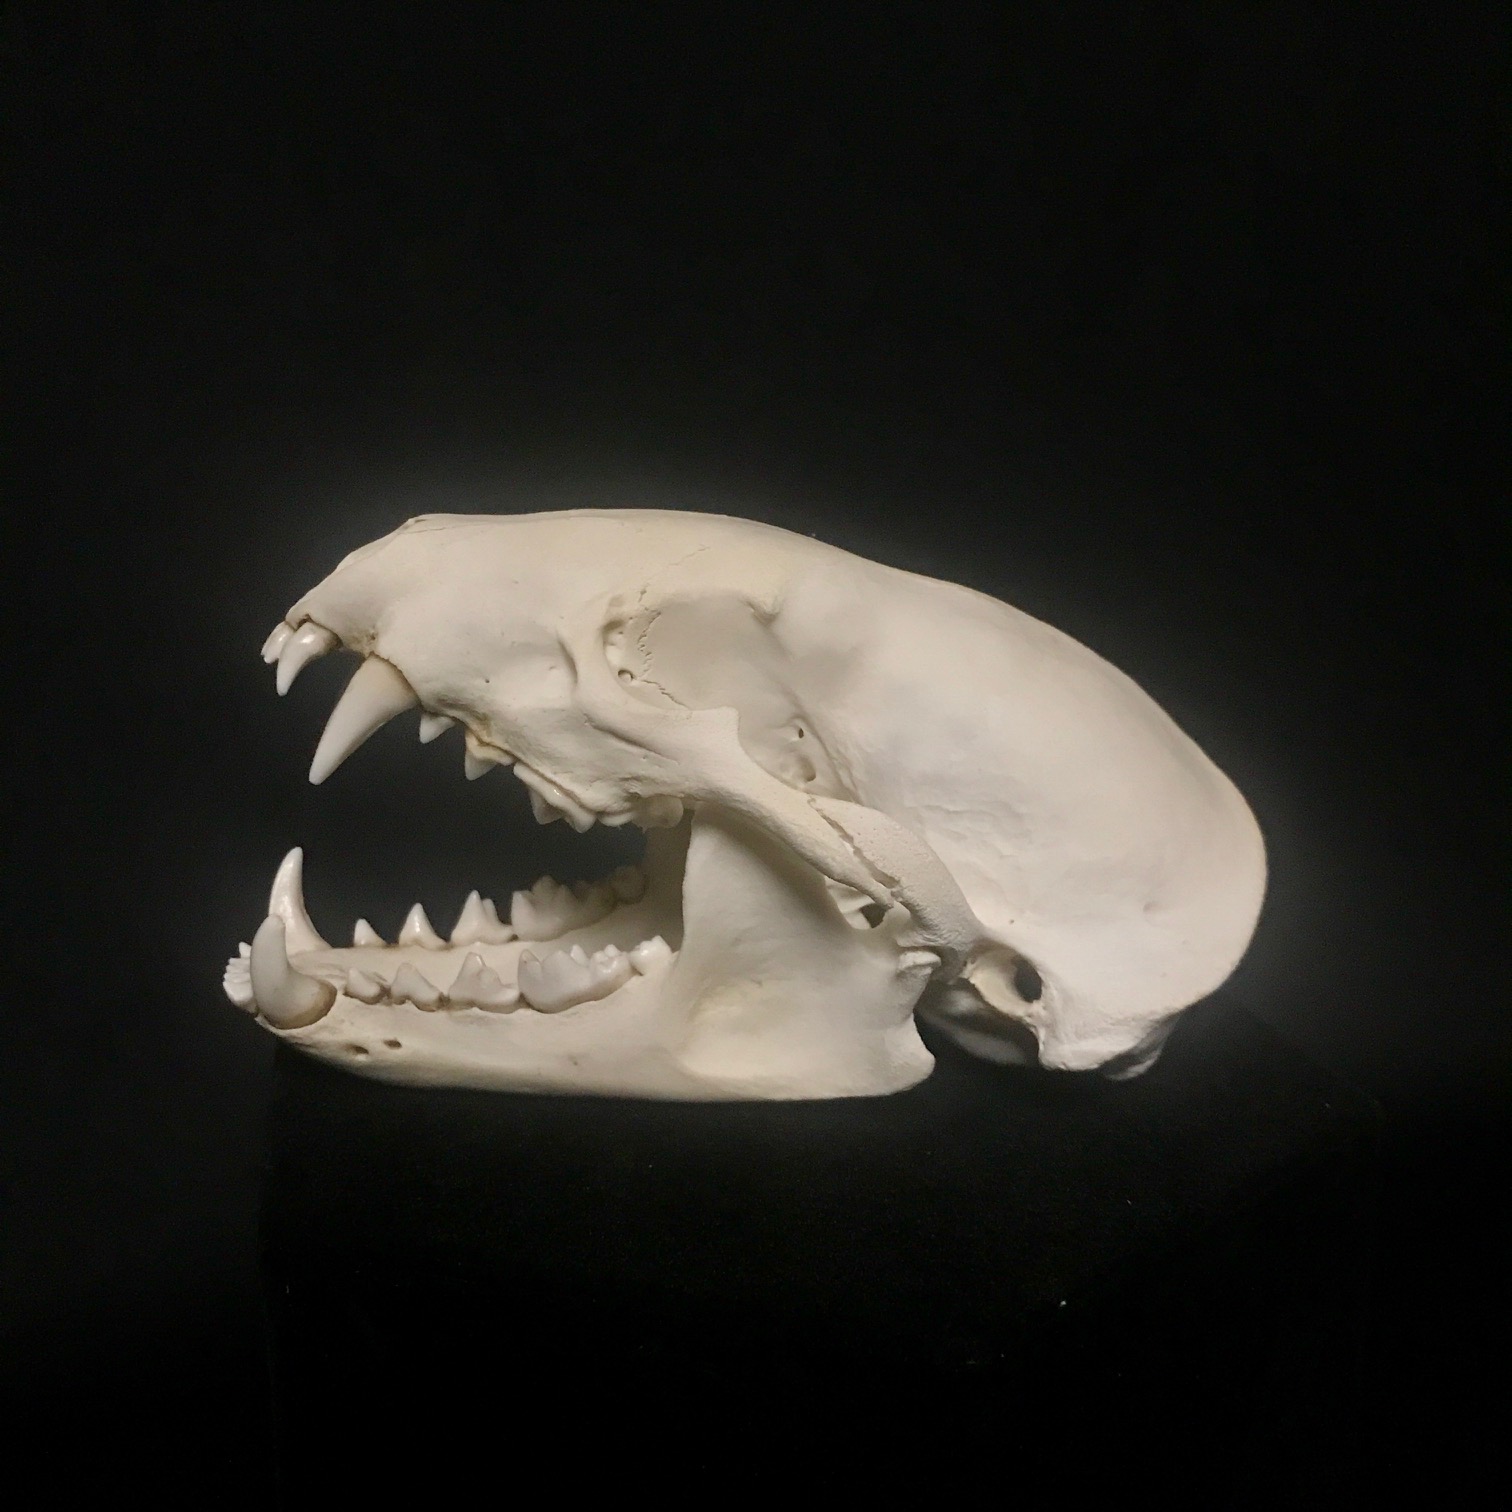 Badger skull, real bone, available for purchase at natur.